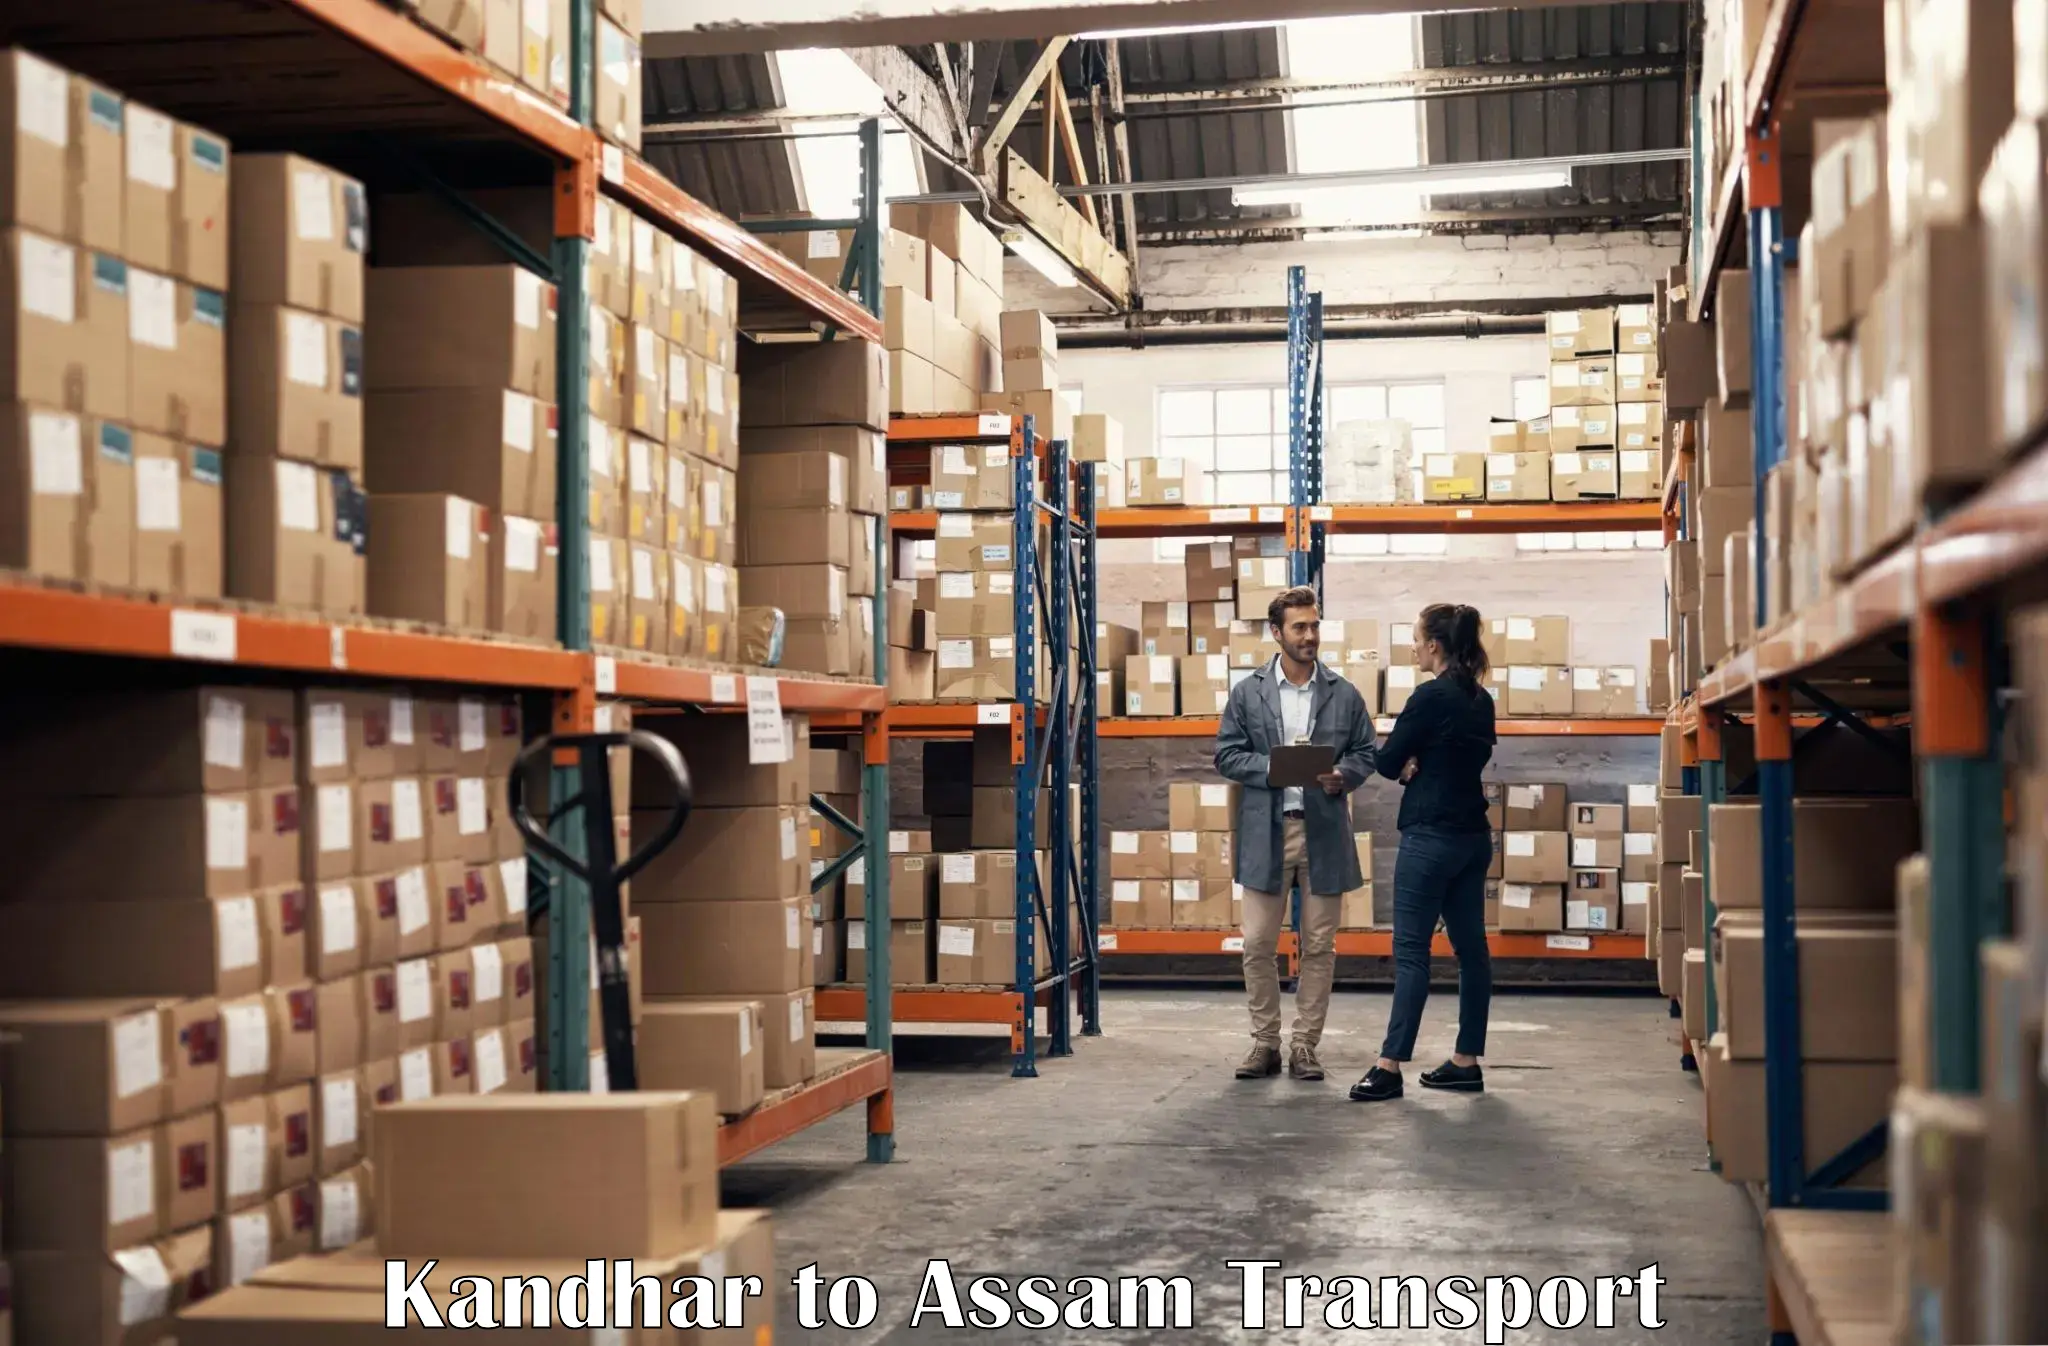 Truck transport companies in India Kandhar to Howraghat